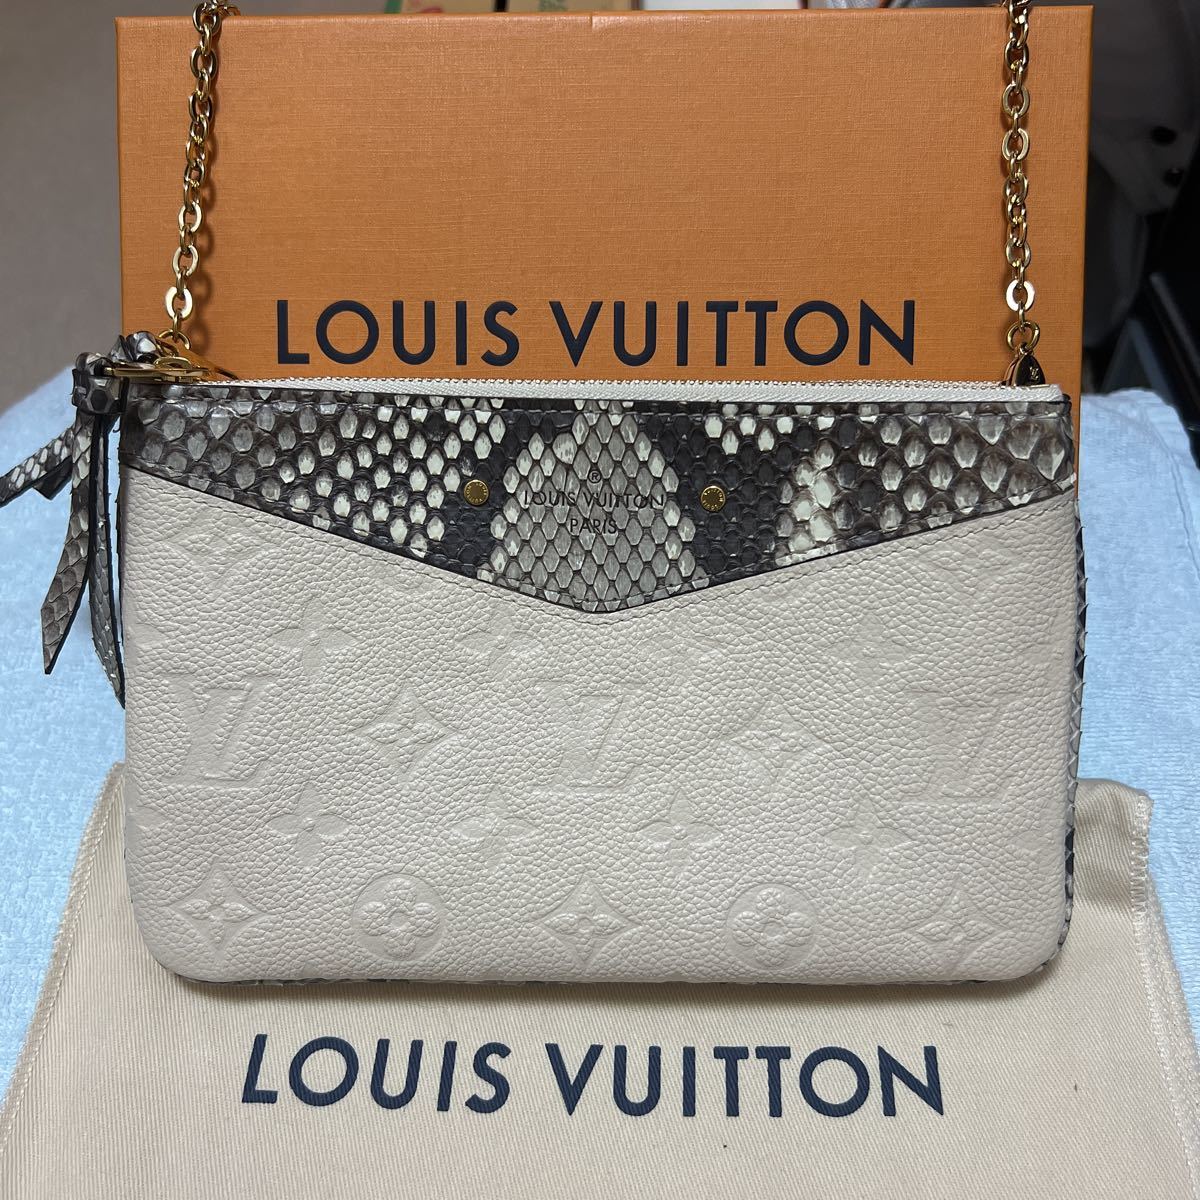 LOUIS VUITTON ルイヴィトン チェーンショルダーバッグ ポシェット